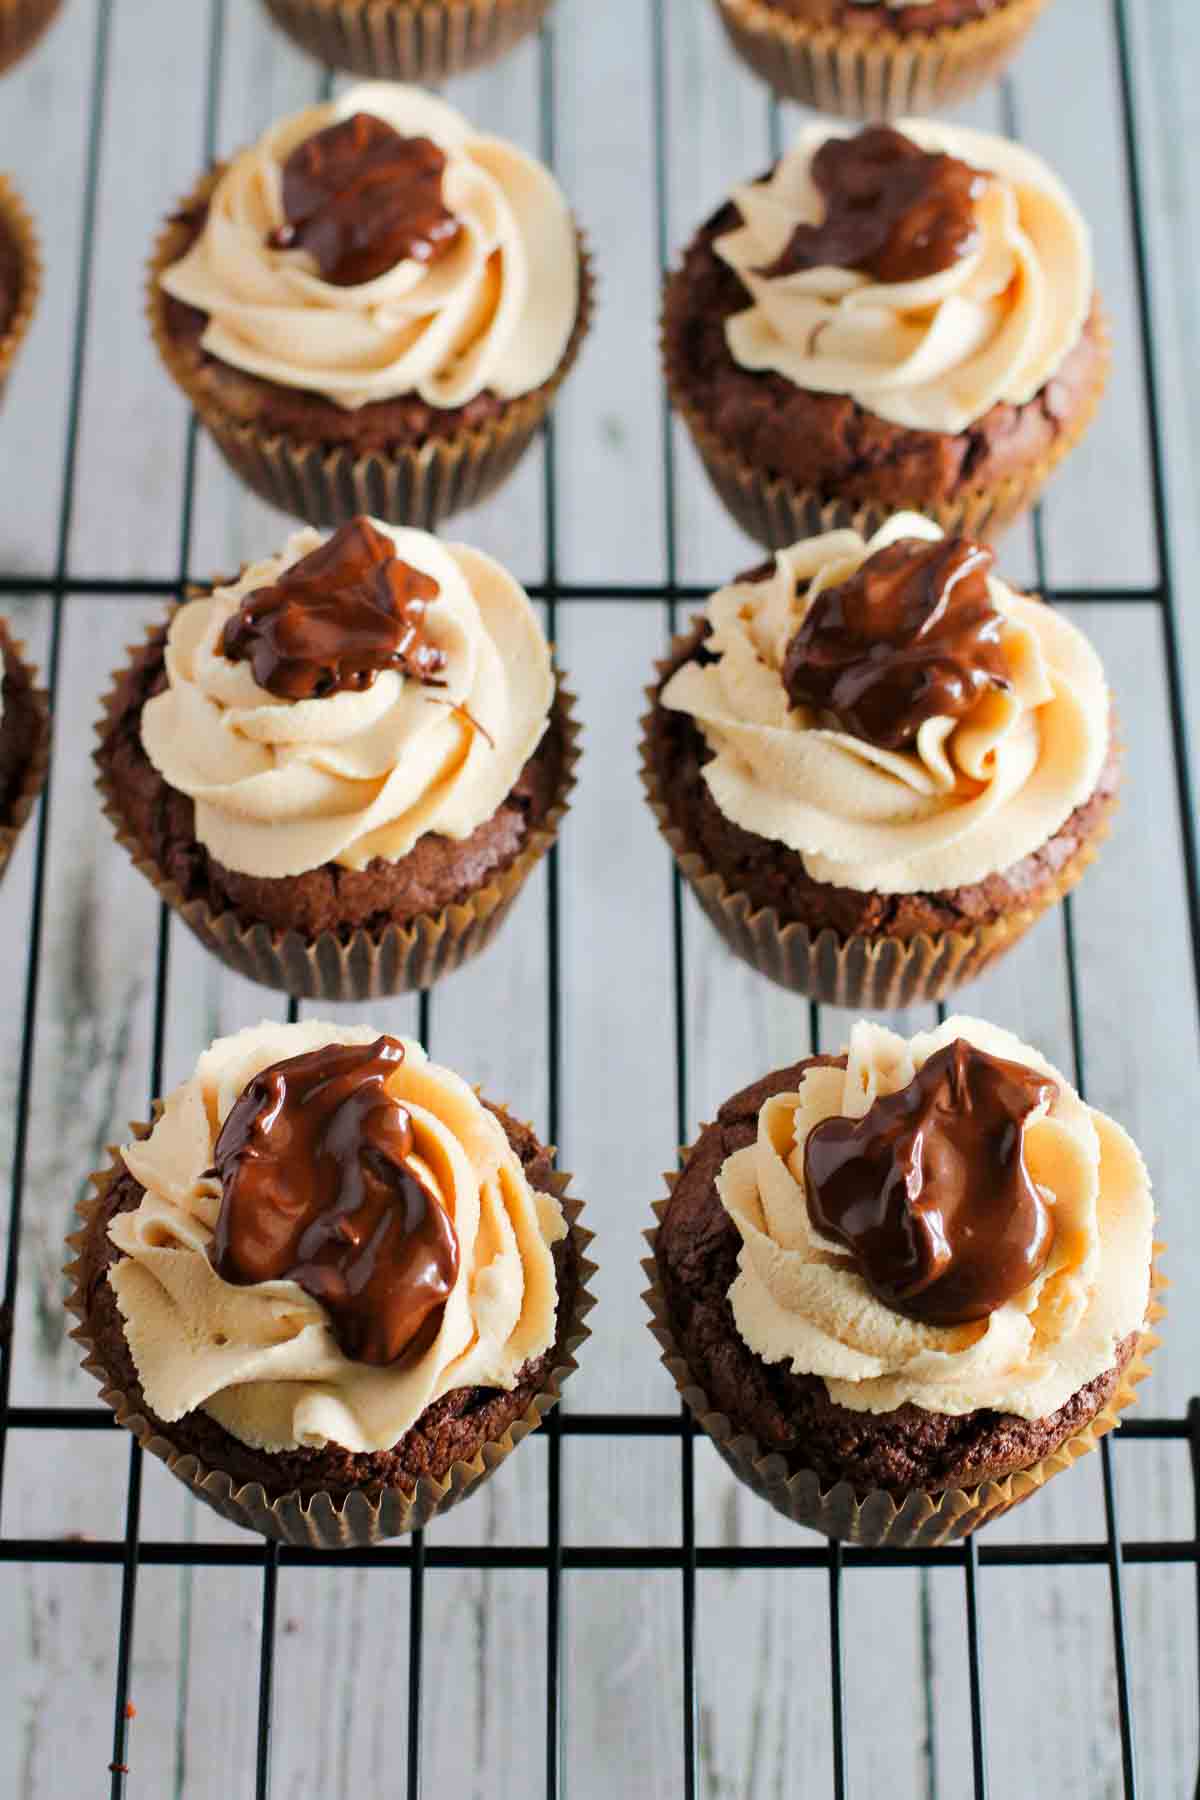 A rack of cupcakes fully frosted with melted chocolate topping drizzled onto the top.